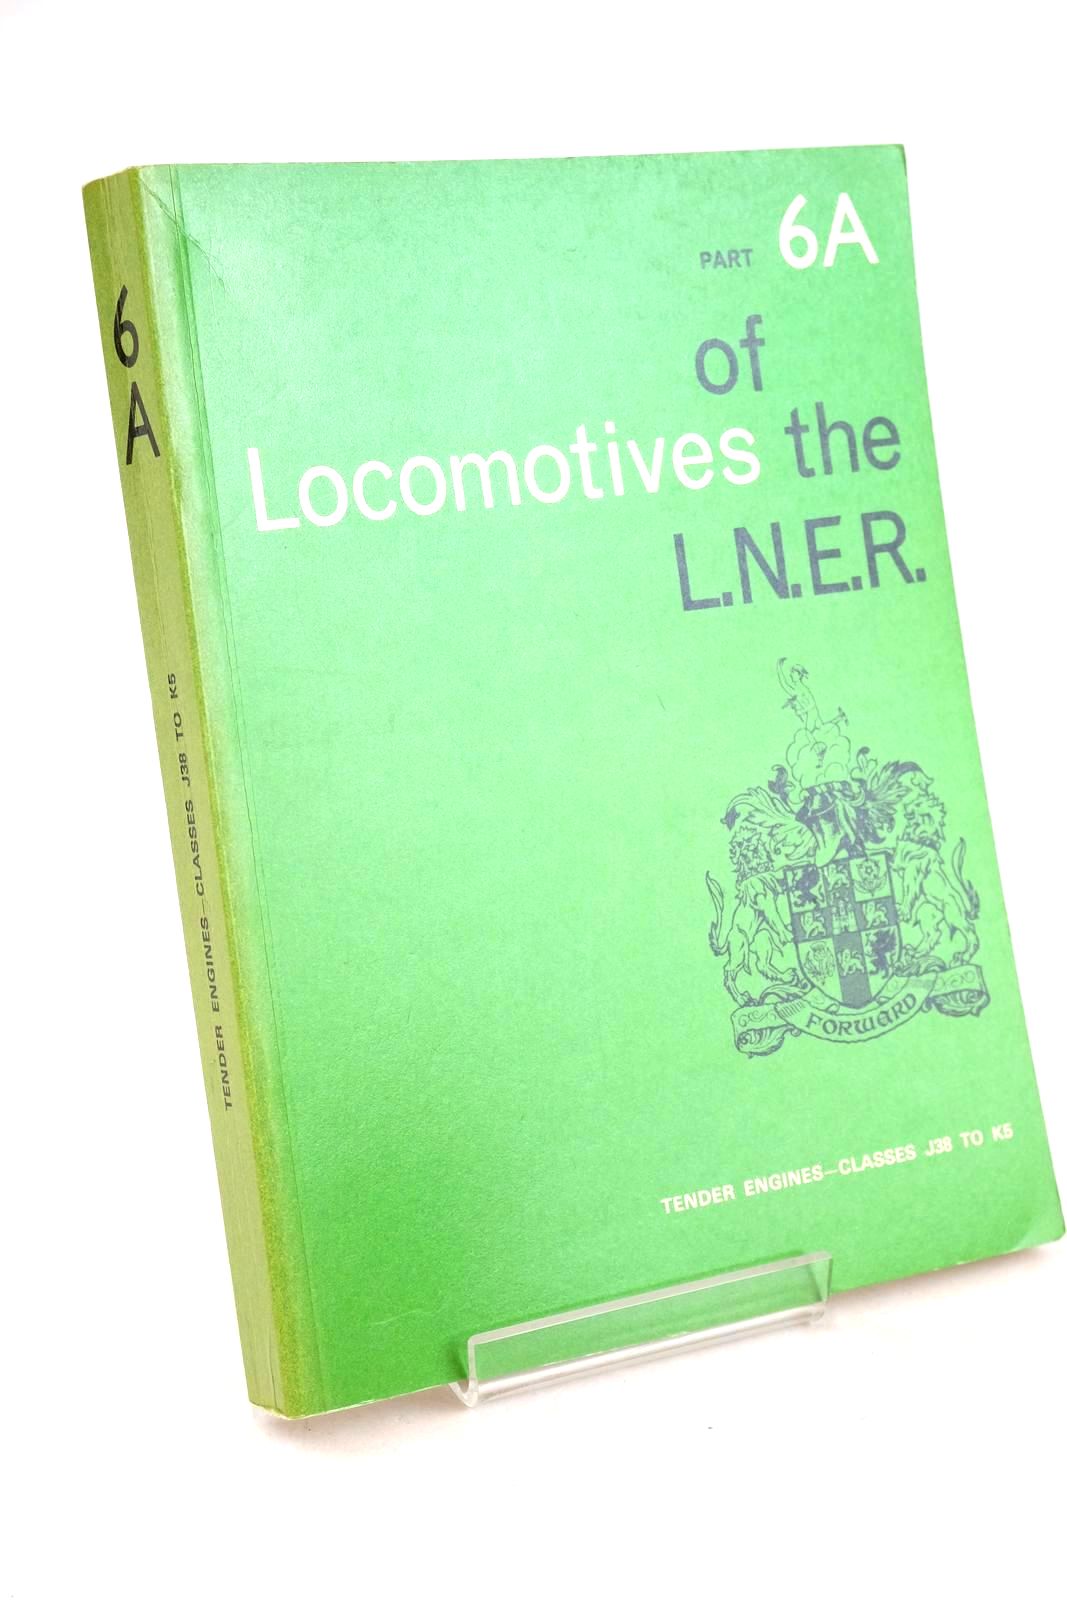 Photo of LOCOMOTIVES OF THE L.N.E.R. PART 6A published by The Railway Correspondence And Travel Society (STOCK CODE: 1327347)  for sale by Stella & Rose's Books